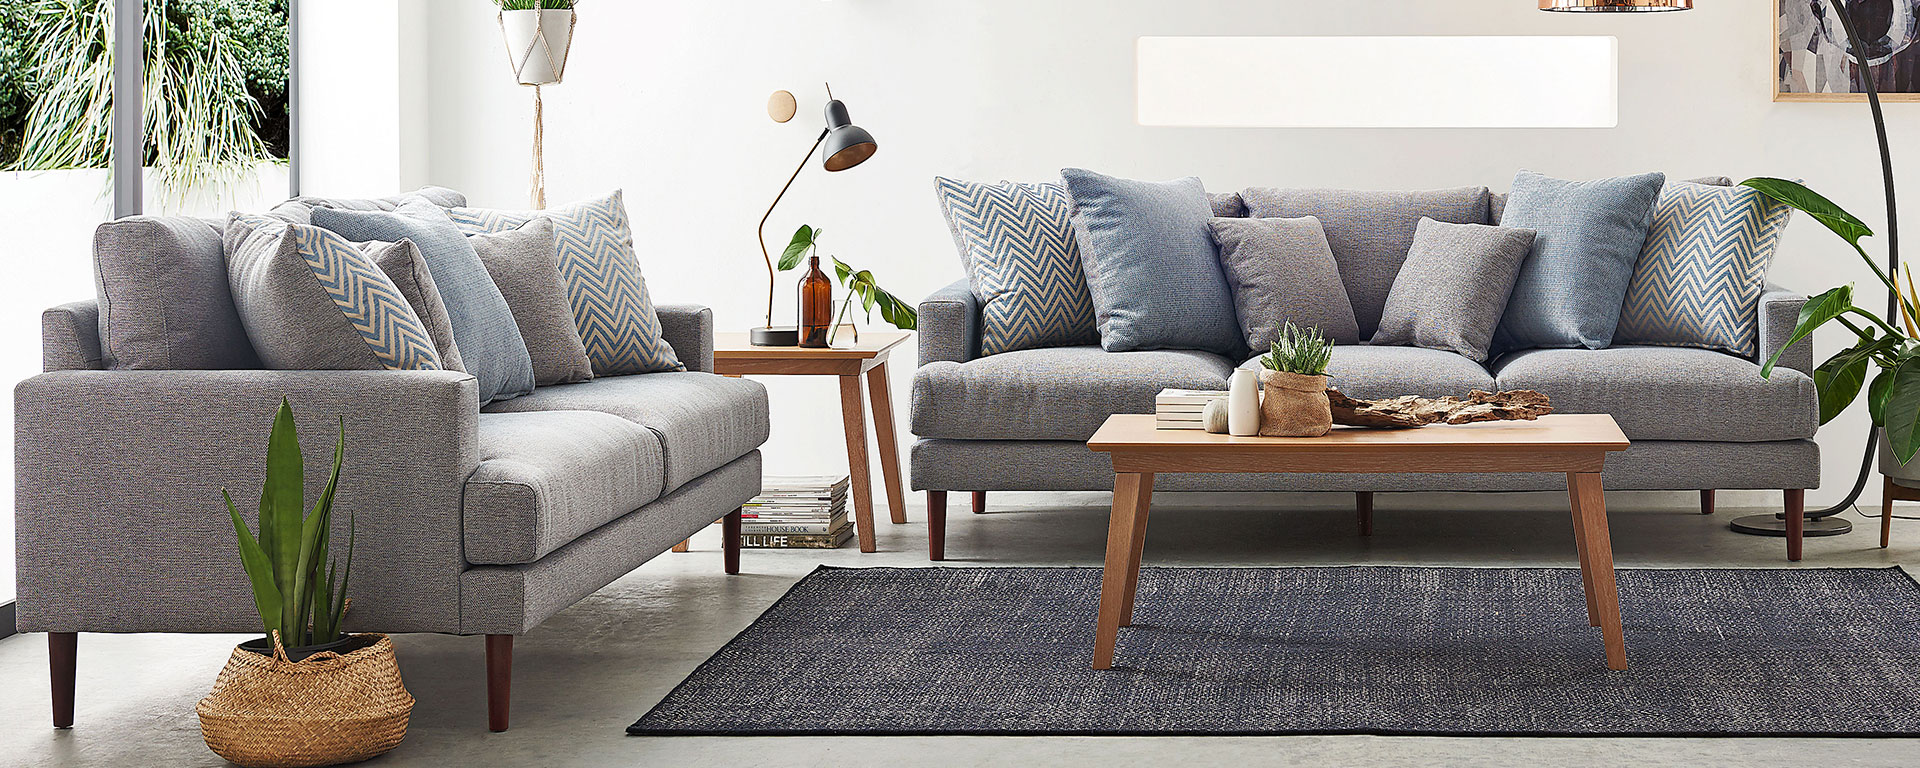 Our Top Furniture Picks To Style Your Home  Harvey Norman 